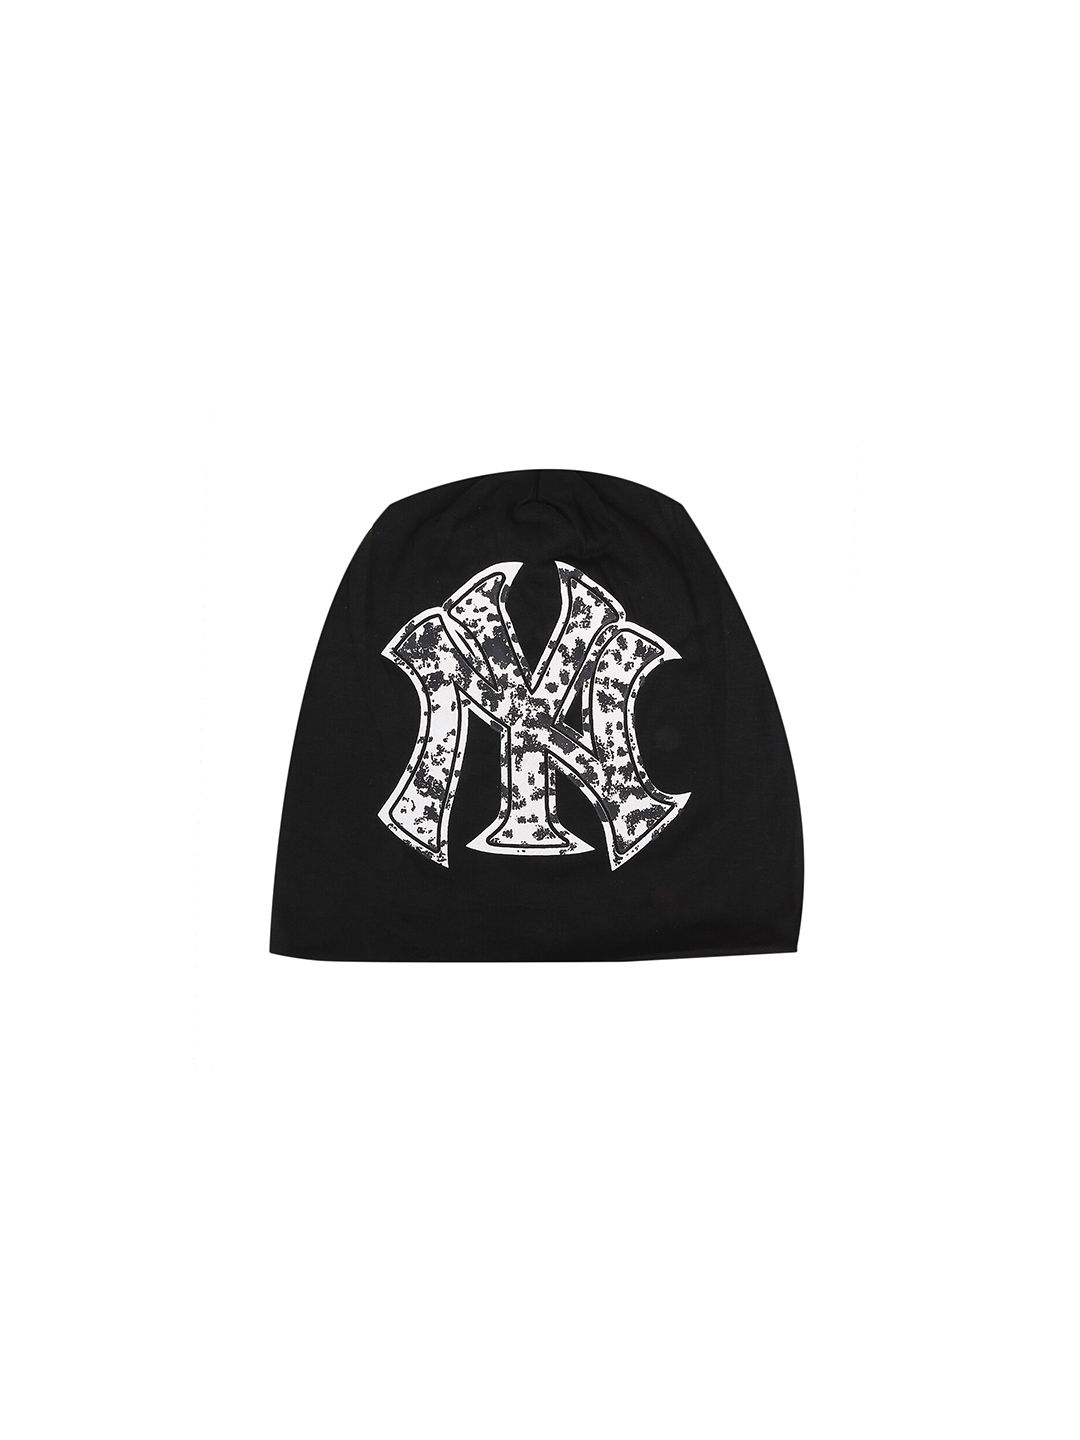 iSWEVEN Unisex Black & White New York Yankees Printed Beanie Price in India